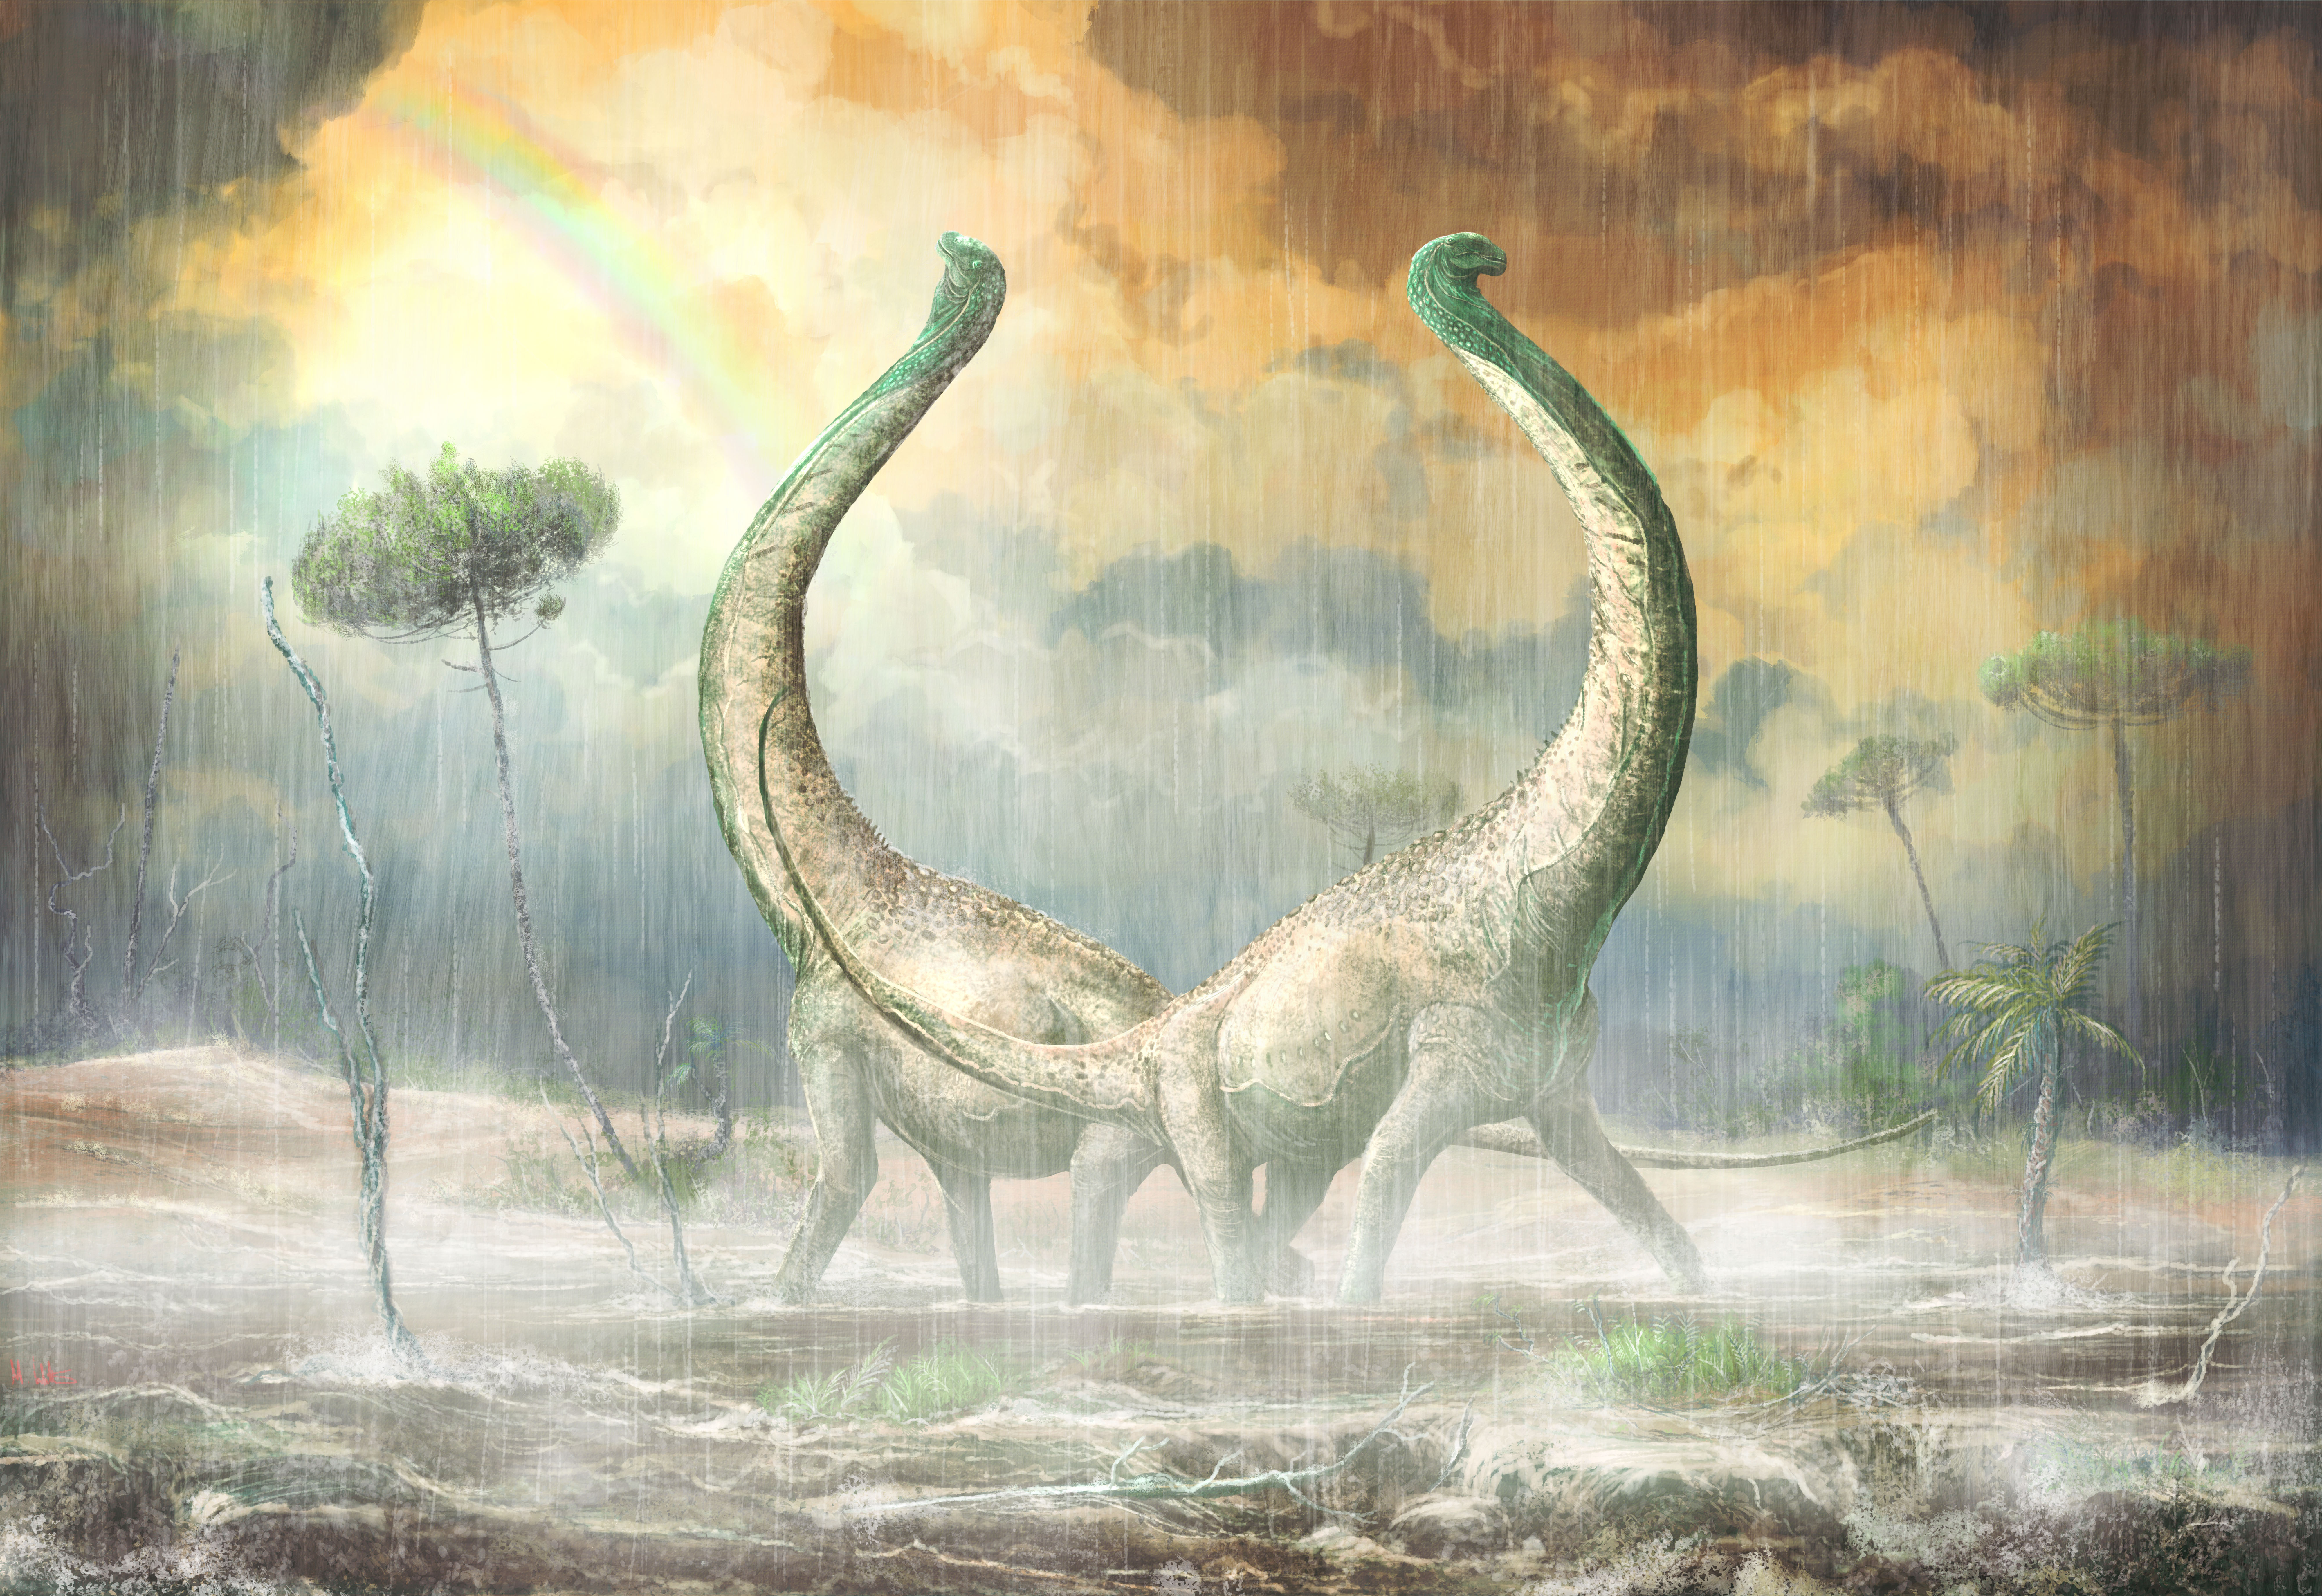 This newly discovered titanosaur had heart-shaped tail bones